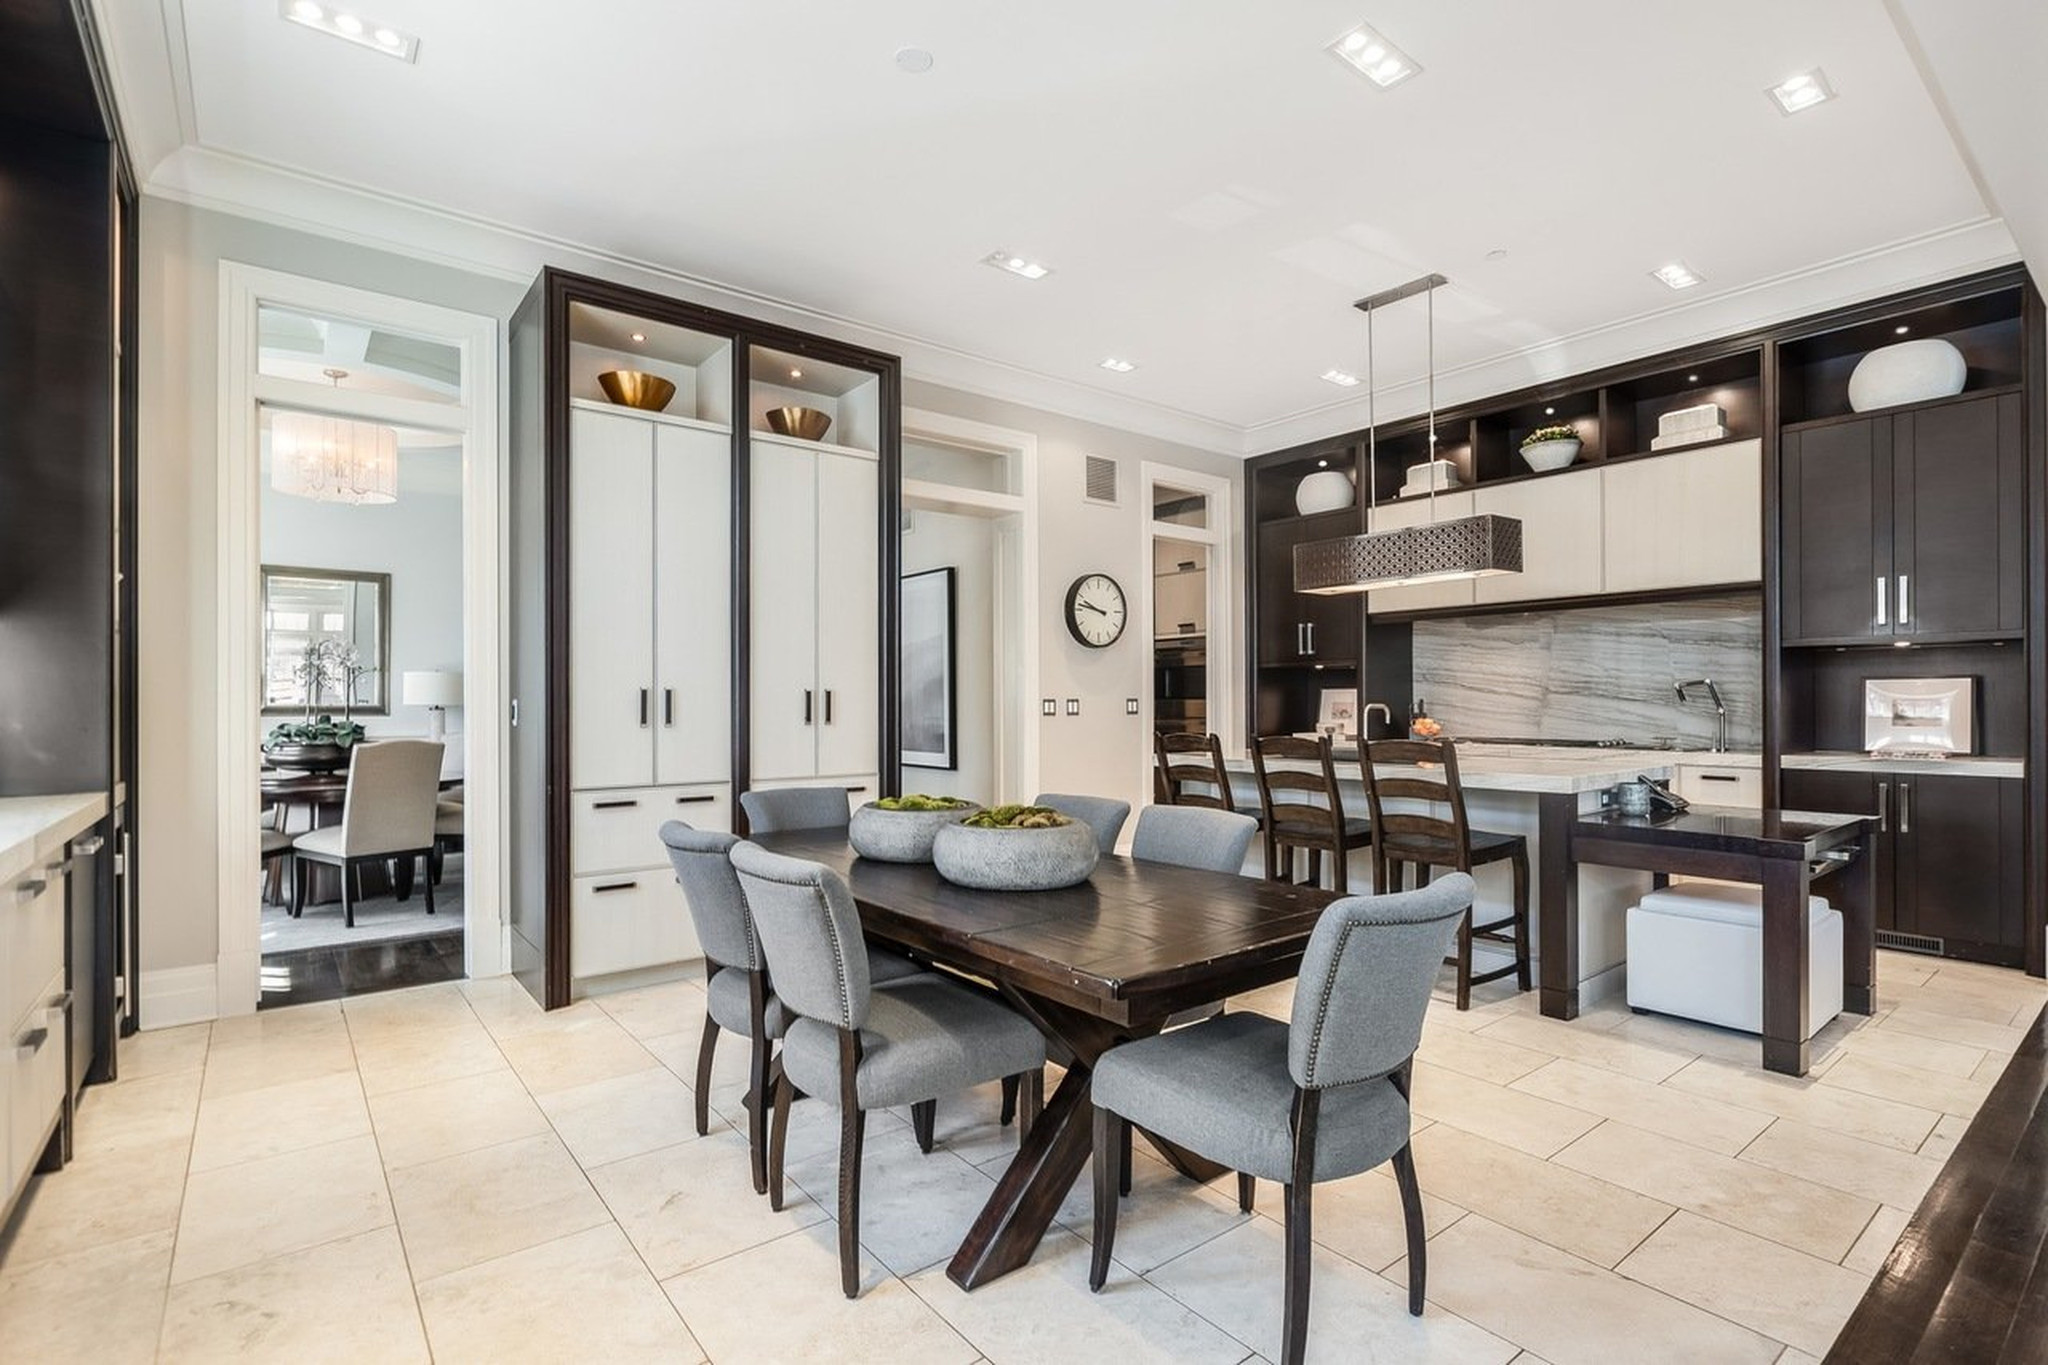 Former Blackhawks player Patrick Sharp lists Lake View home for $3.13M